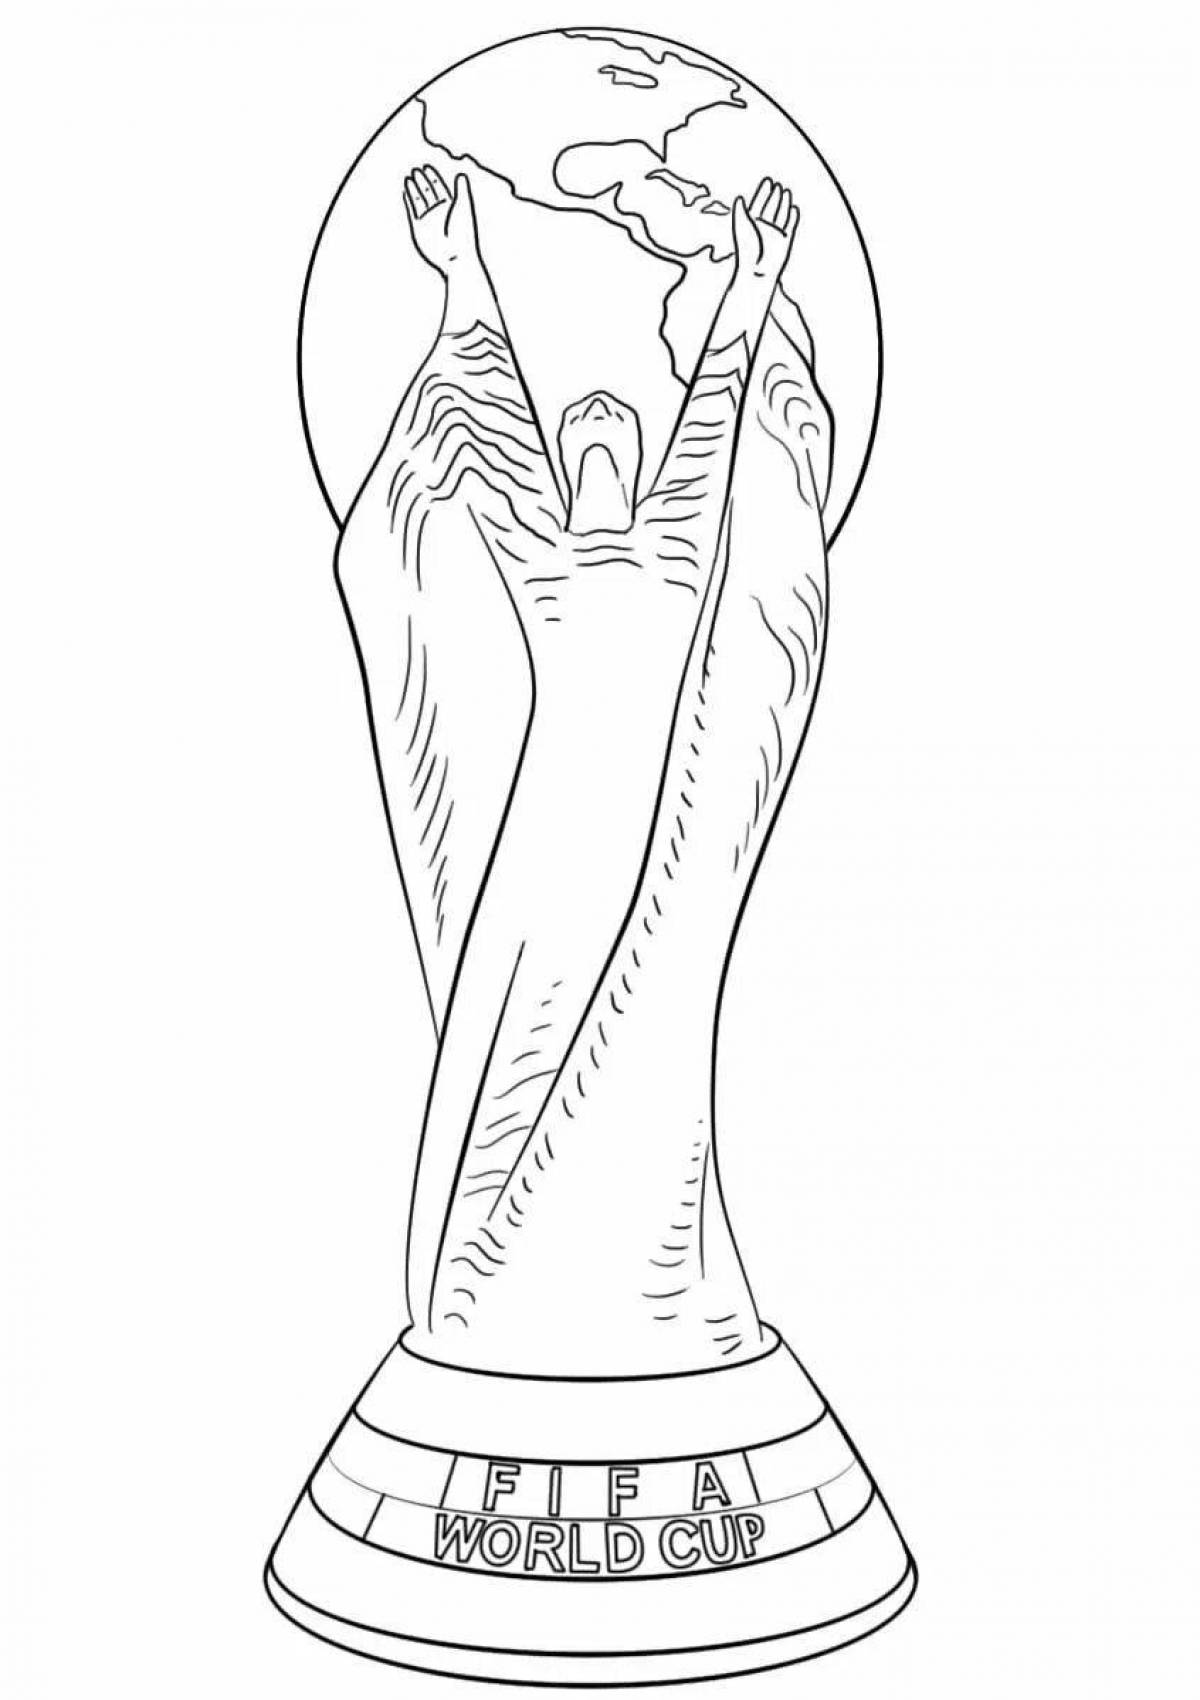 Champions league cup coloring page with colorful ink